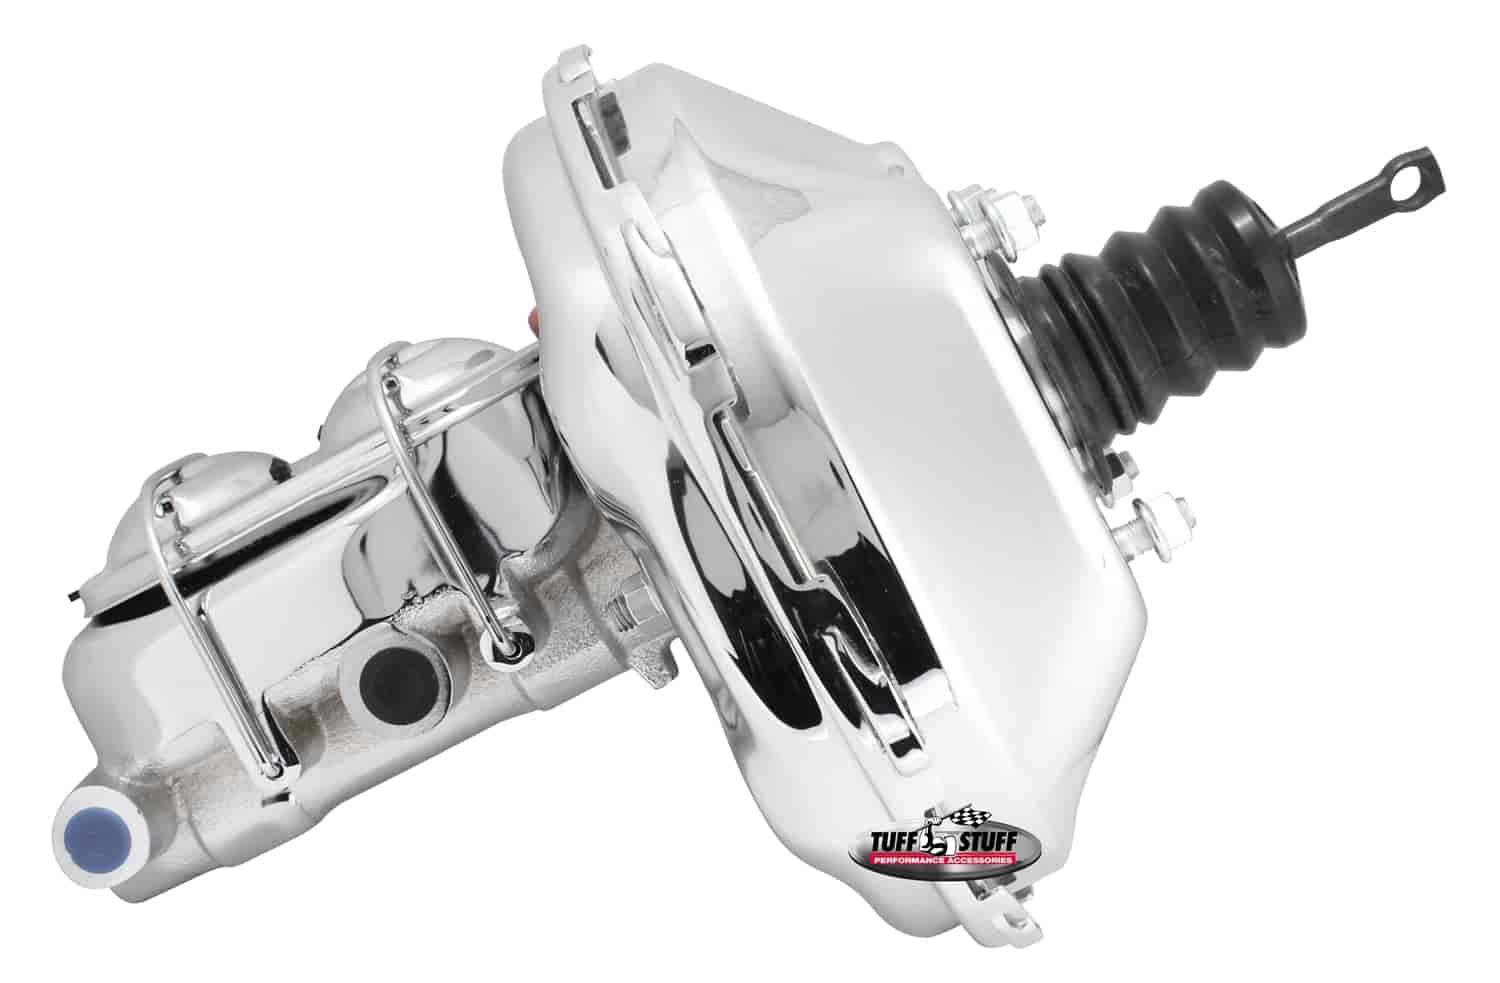 11" Booster Combo 2020 Master Cylinder